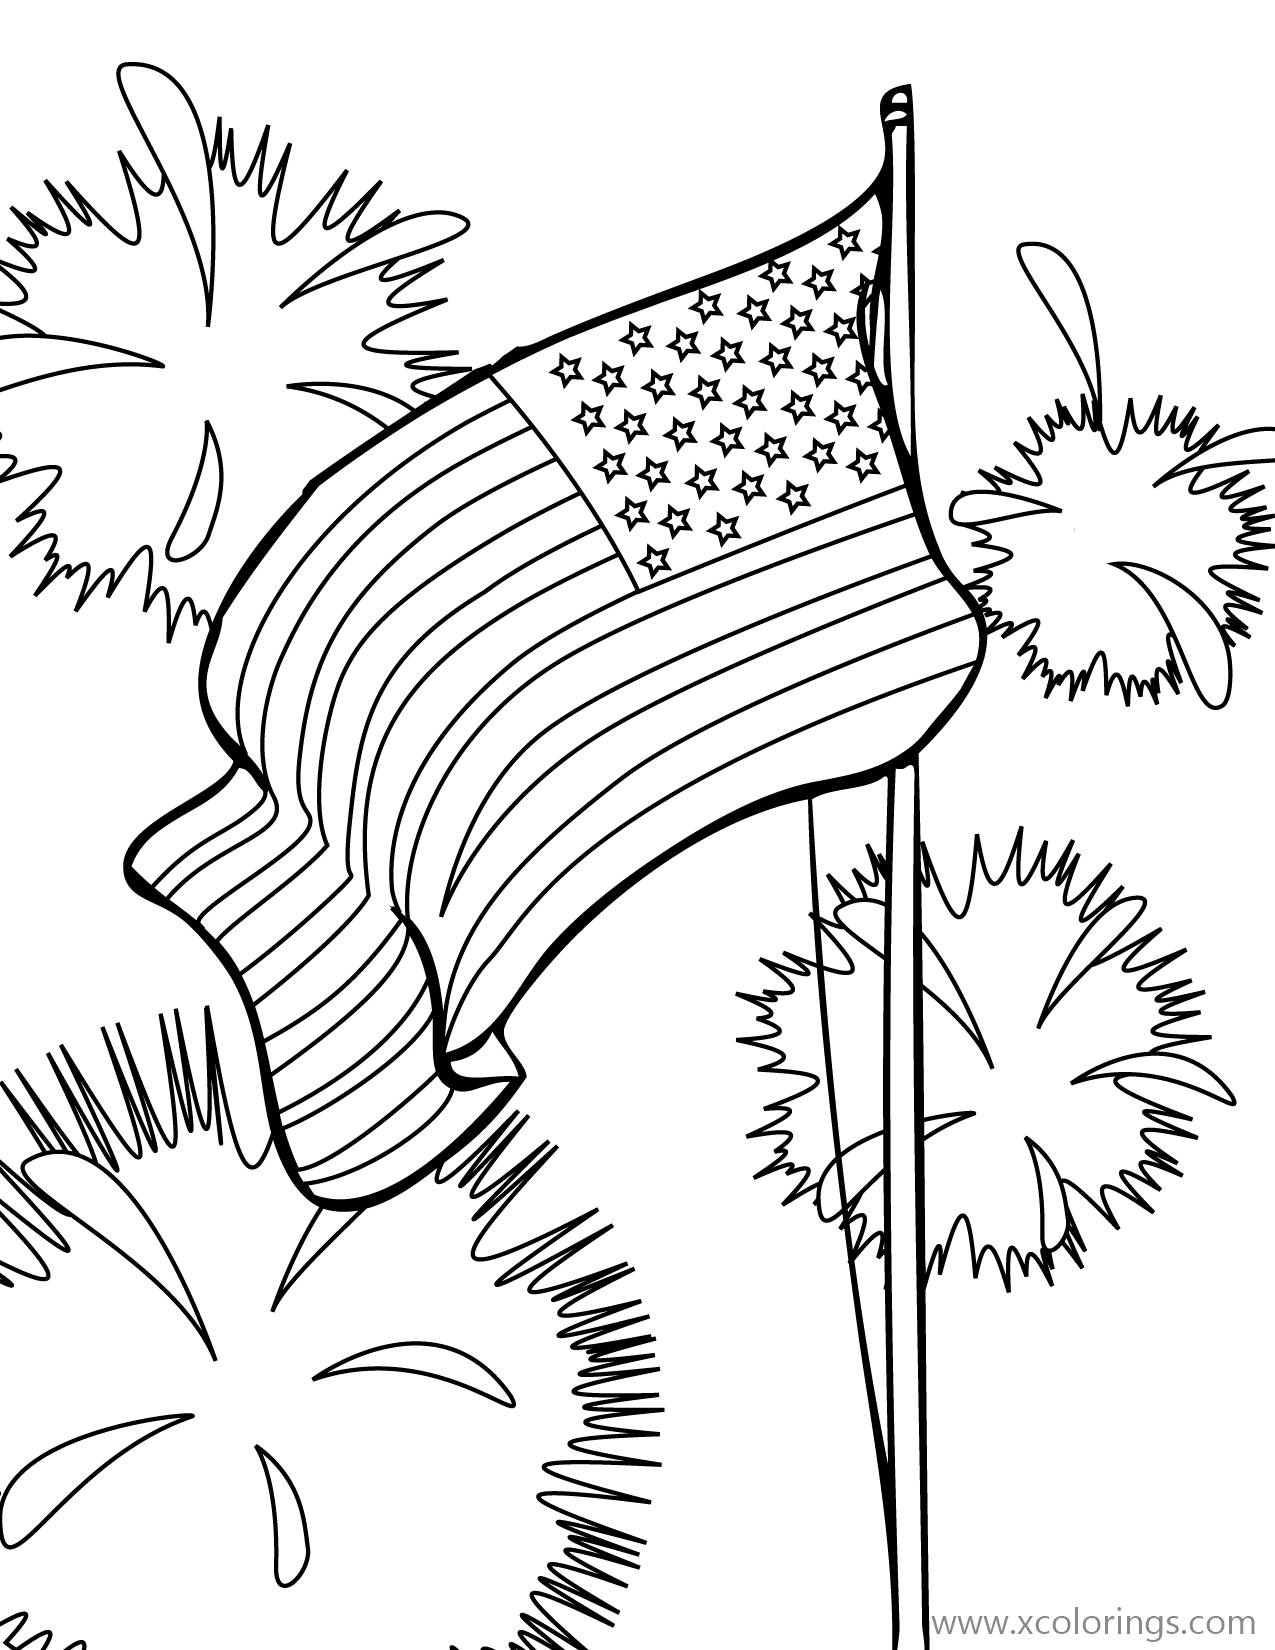 Free 4th of July Coloring Pages Flag and Fireworks printable